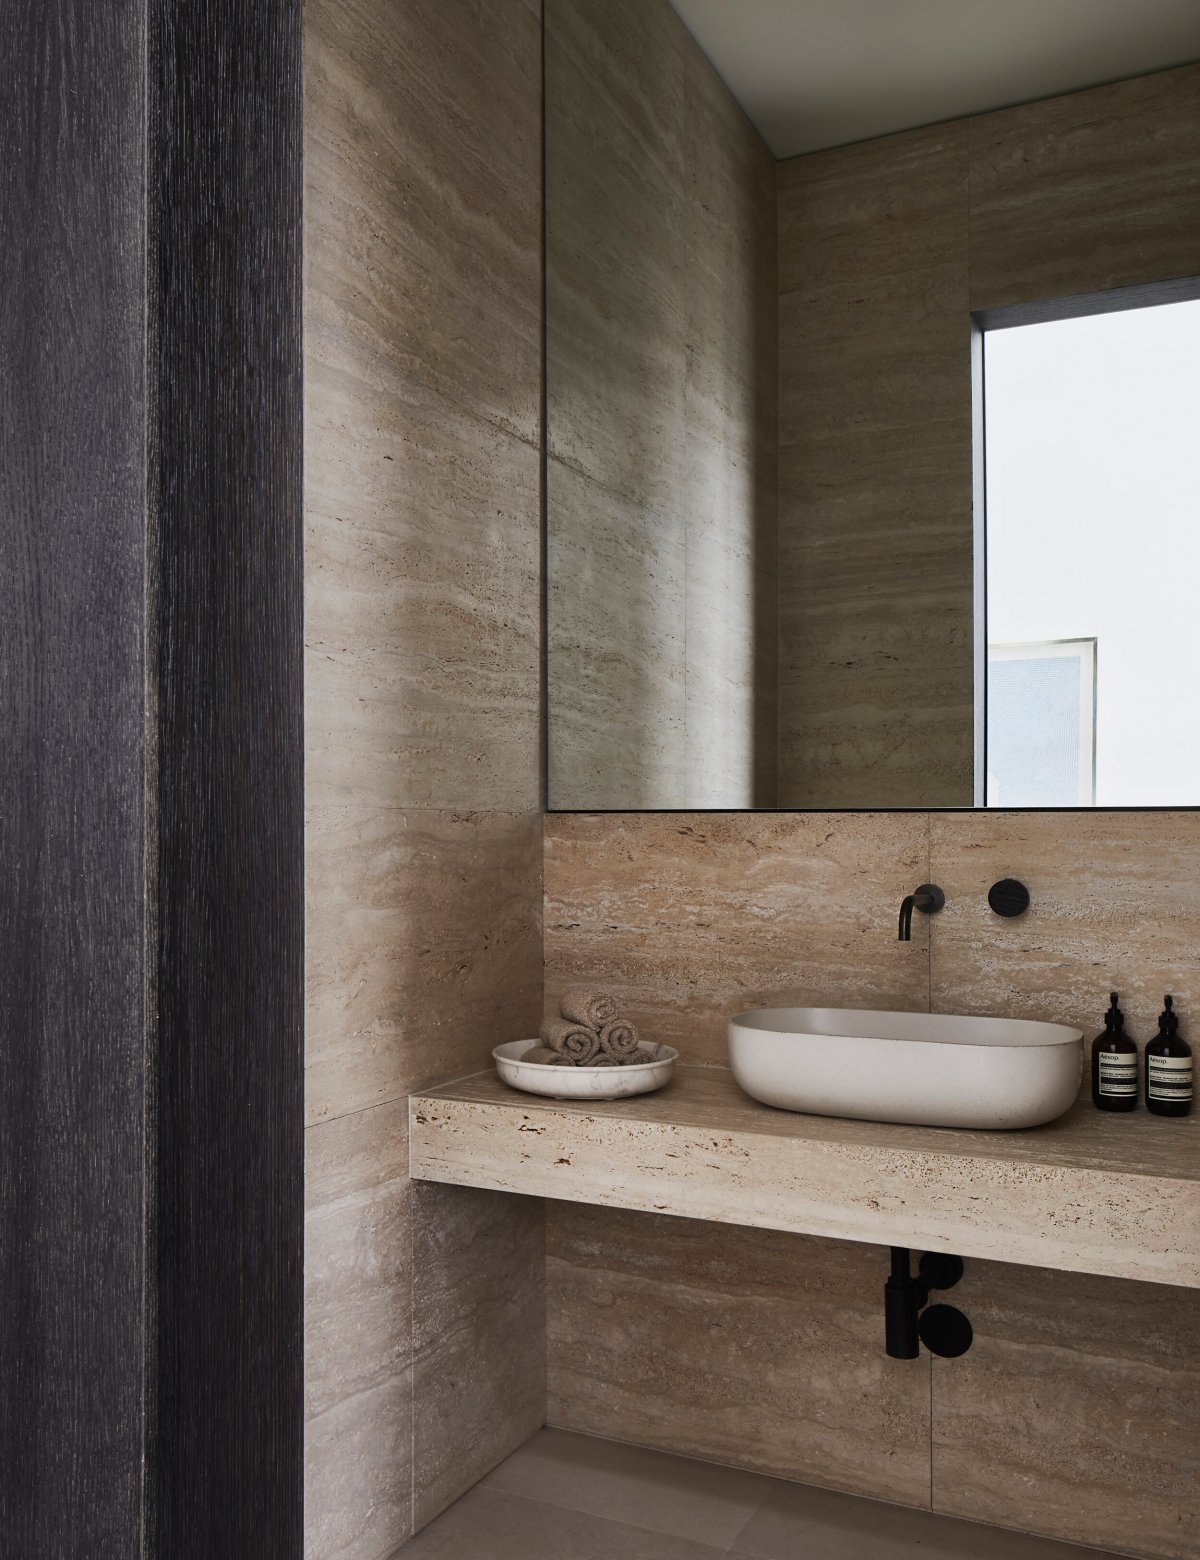 Modern bathroom with wooden tones in the wall